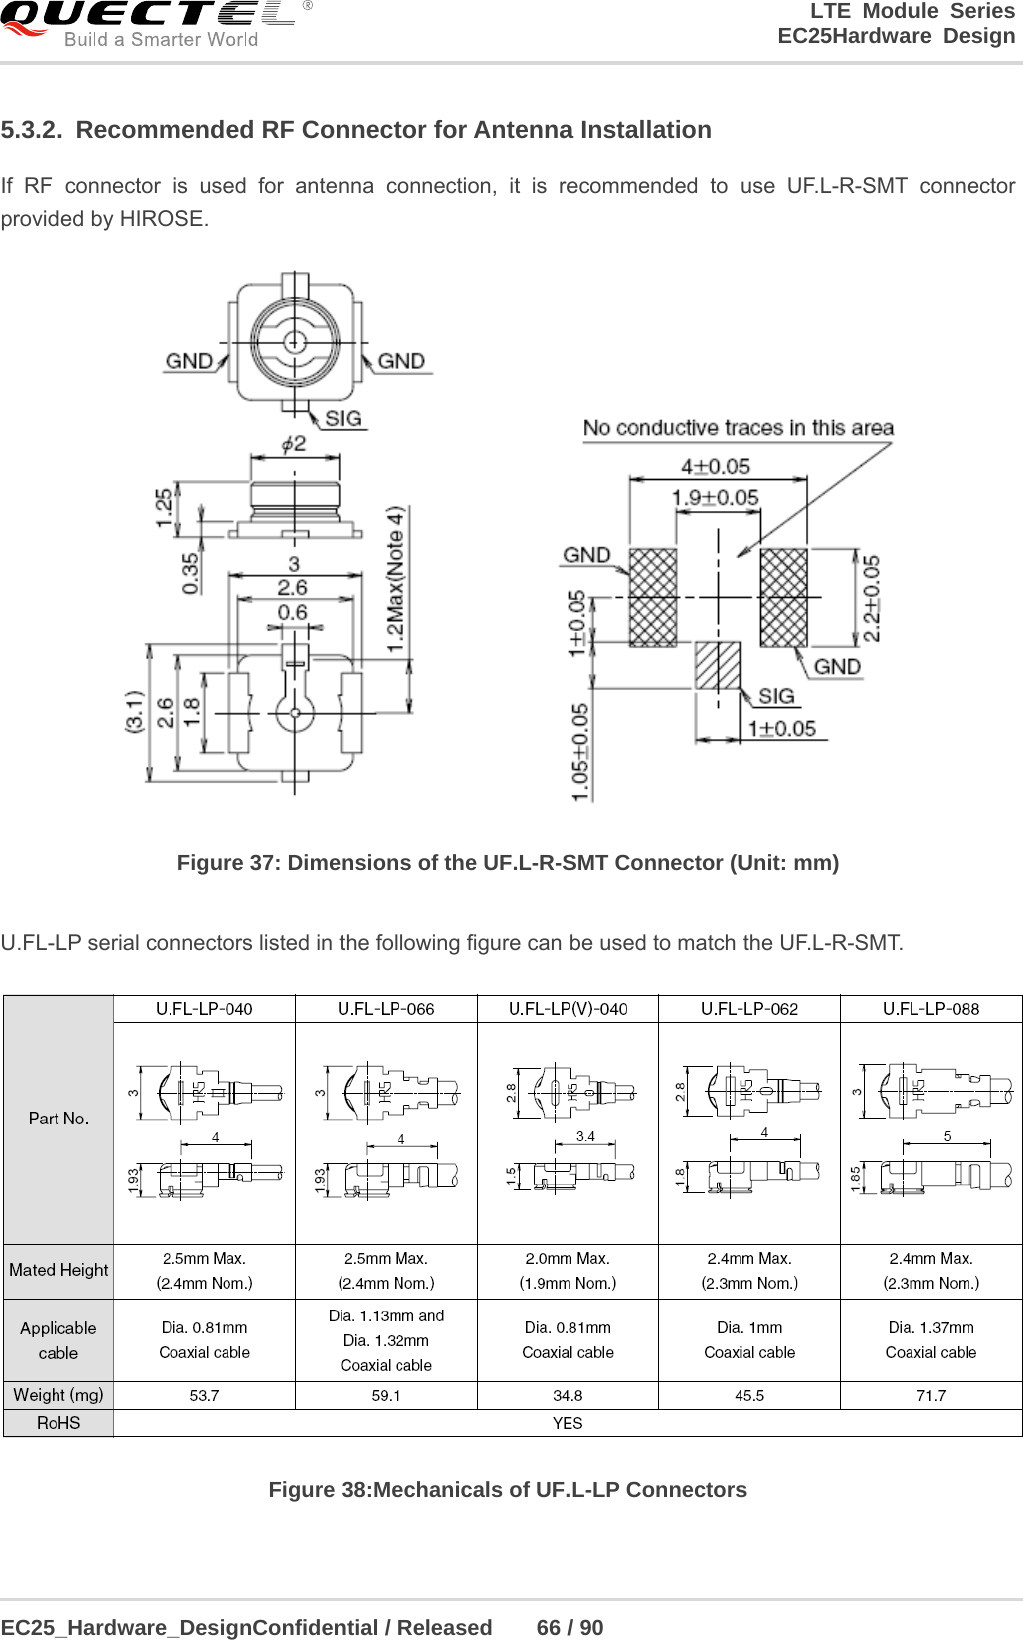 LTE Module Series                                                  EC25Hardware Design  EC25_Hardware_DesignConfidential / Released    66 / 90    5.3.2.  Recommended RF Connector for Antenna Installation If RF connector is used for antenna connection, it is recommended to use UF.L-R-SMT connector provided by HIROSE.  Figure 37: Dimensions of the UF.L-R-SMT Connector (Unit: mm)  U.FL-LP serial connectors listed in the following figure can be used to match the UF.L-R-SMT.  Figure 38:Mechanicals of UF.L-LP Connectors  